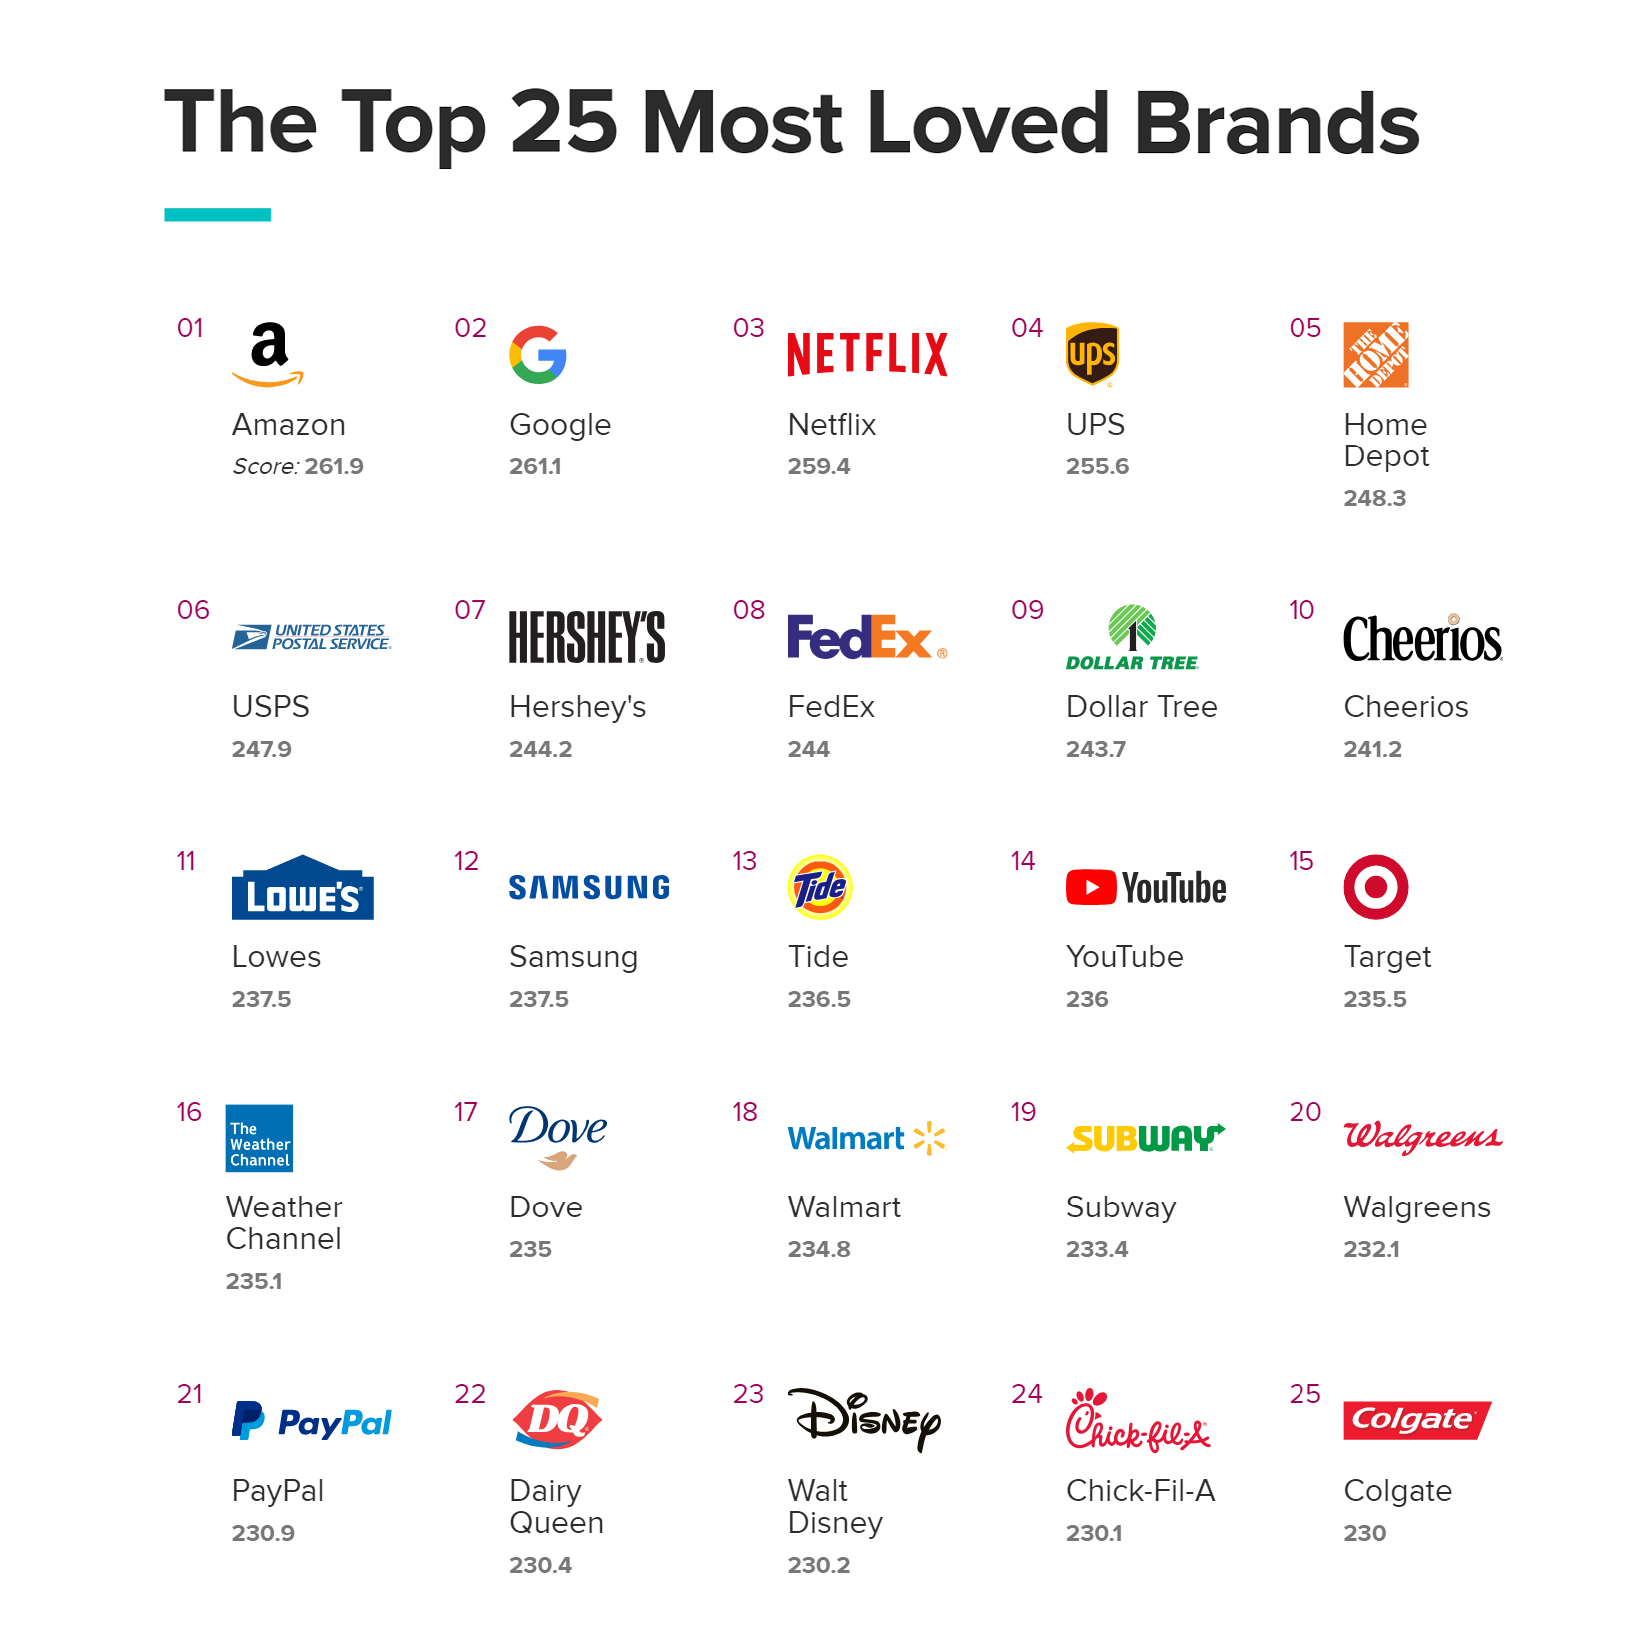 These Are the Most Loved Brands of 2019 